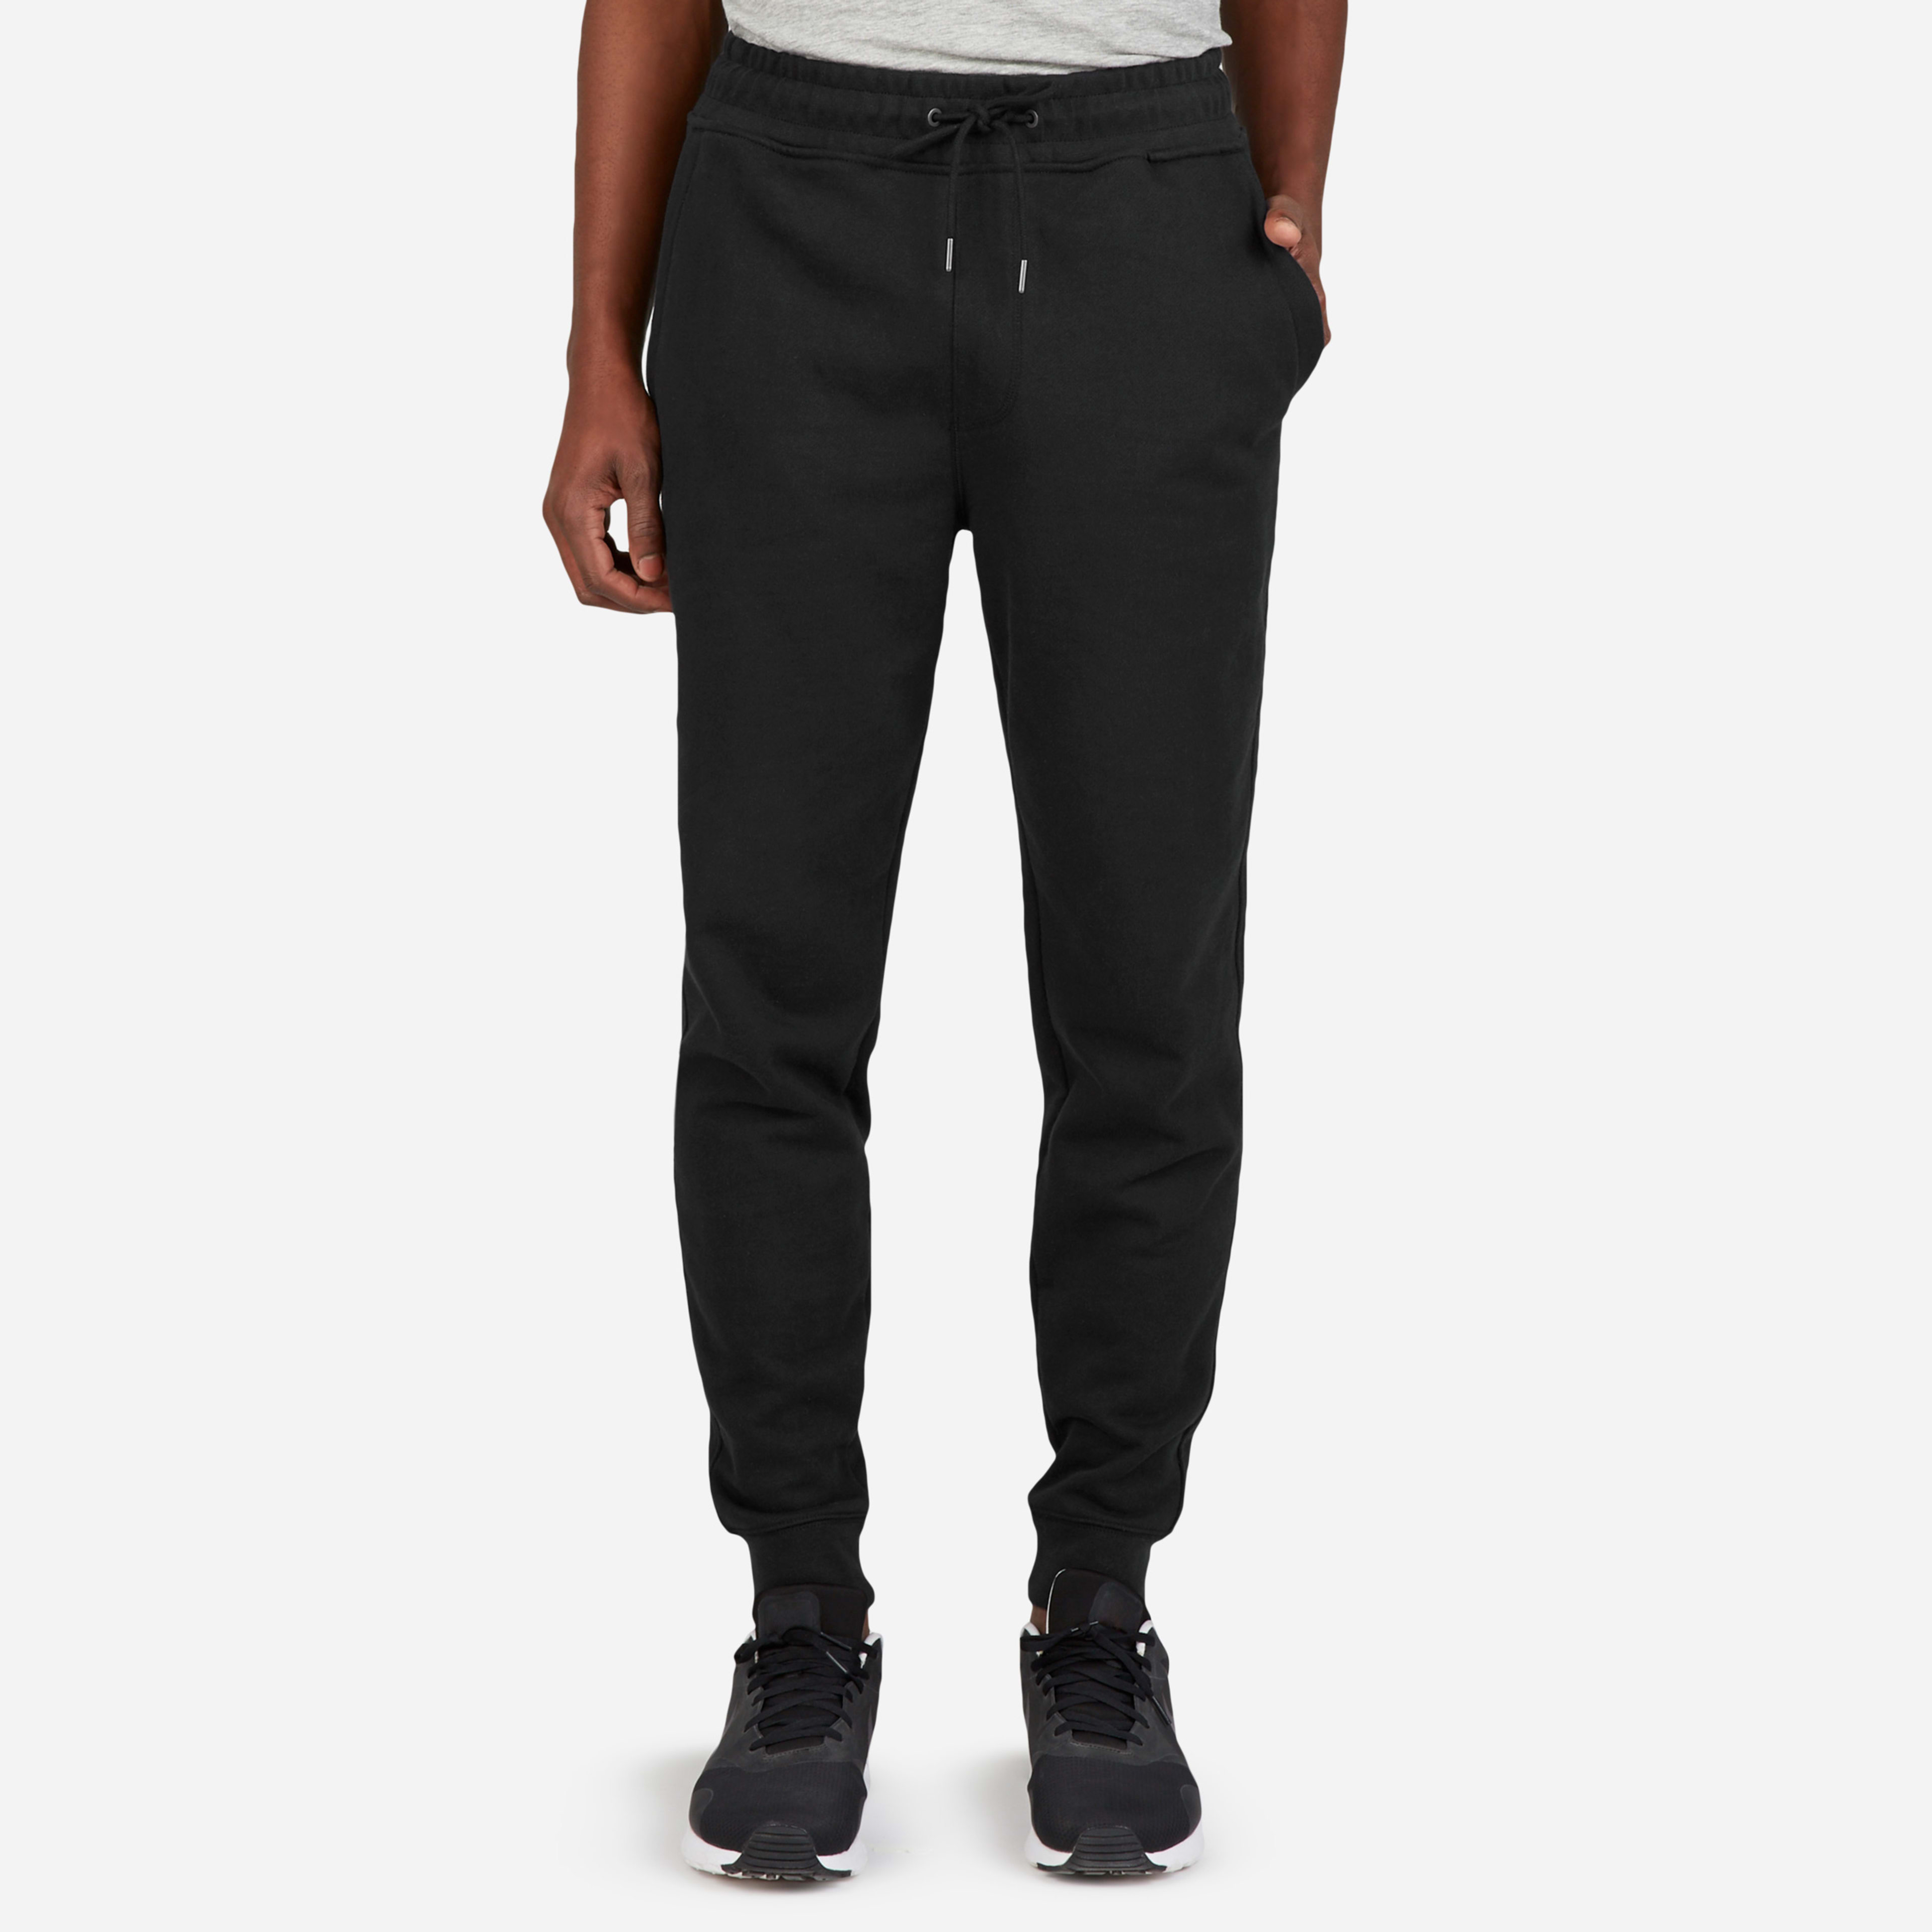 M french Terry pant heather grey